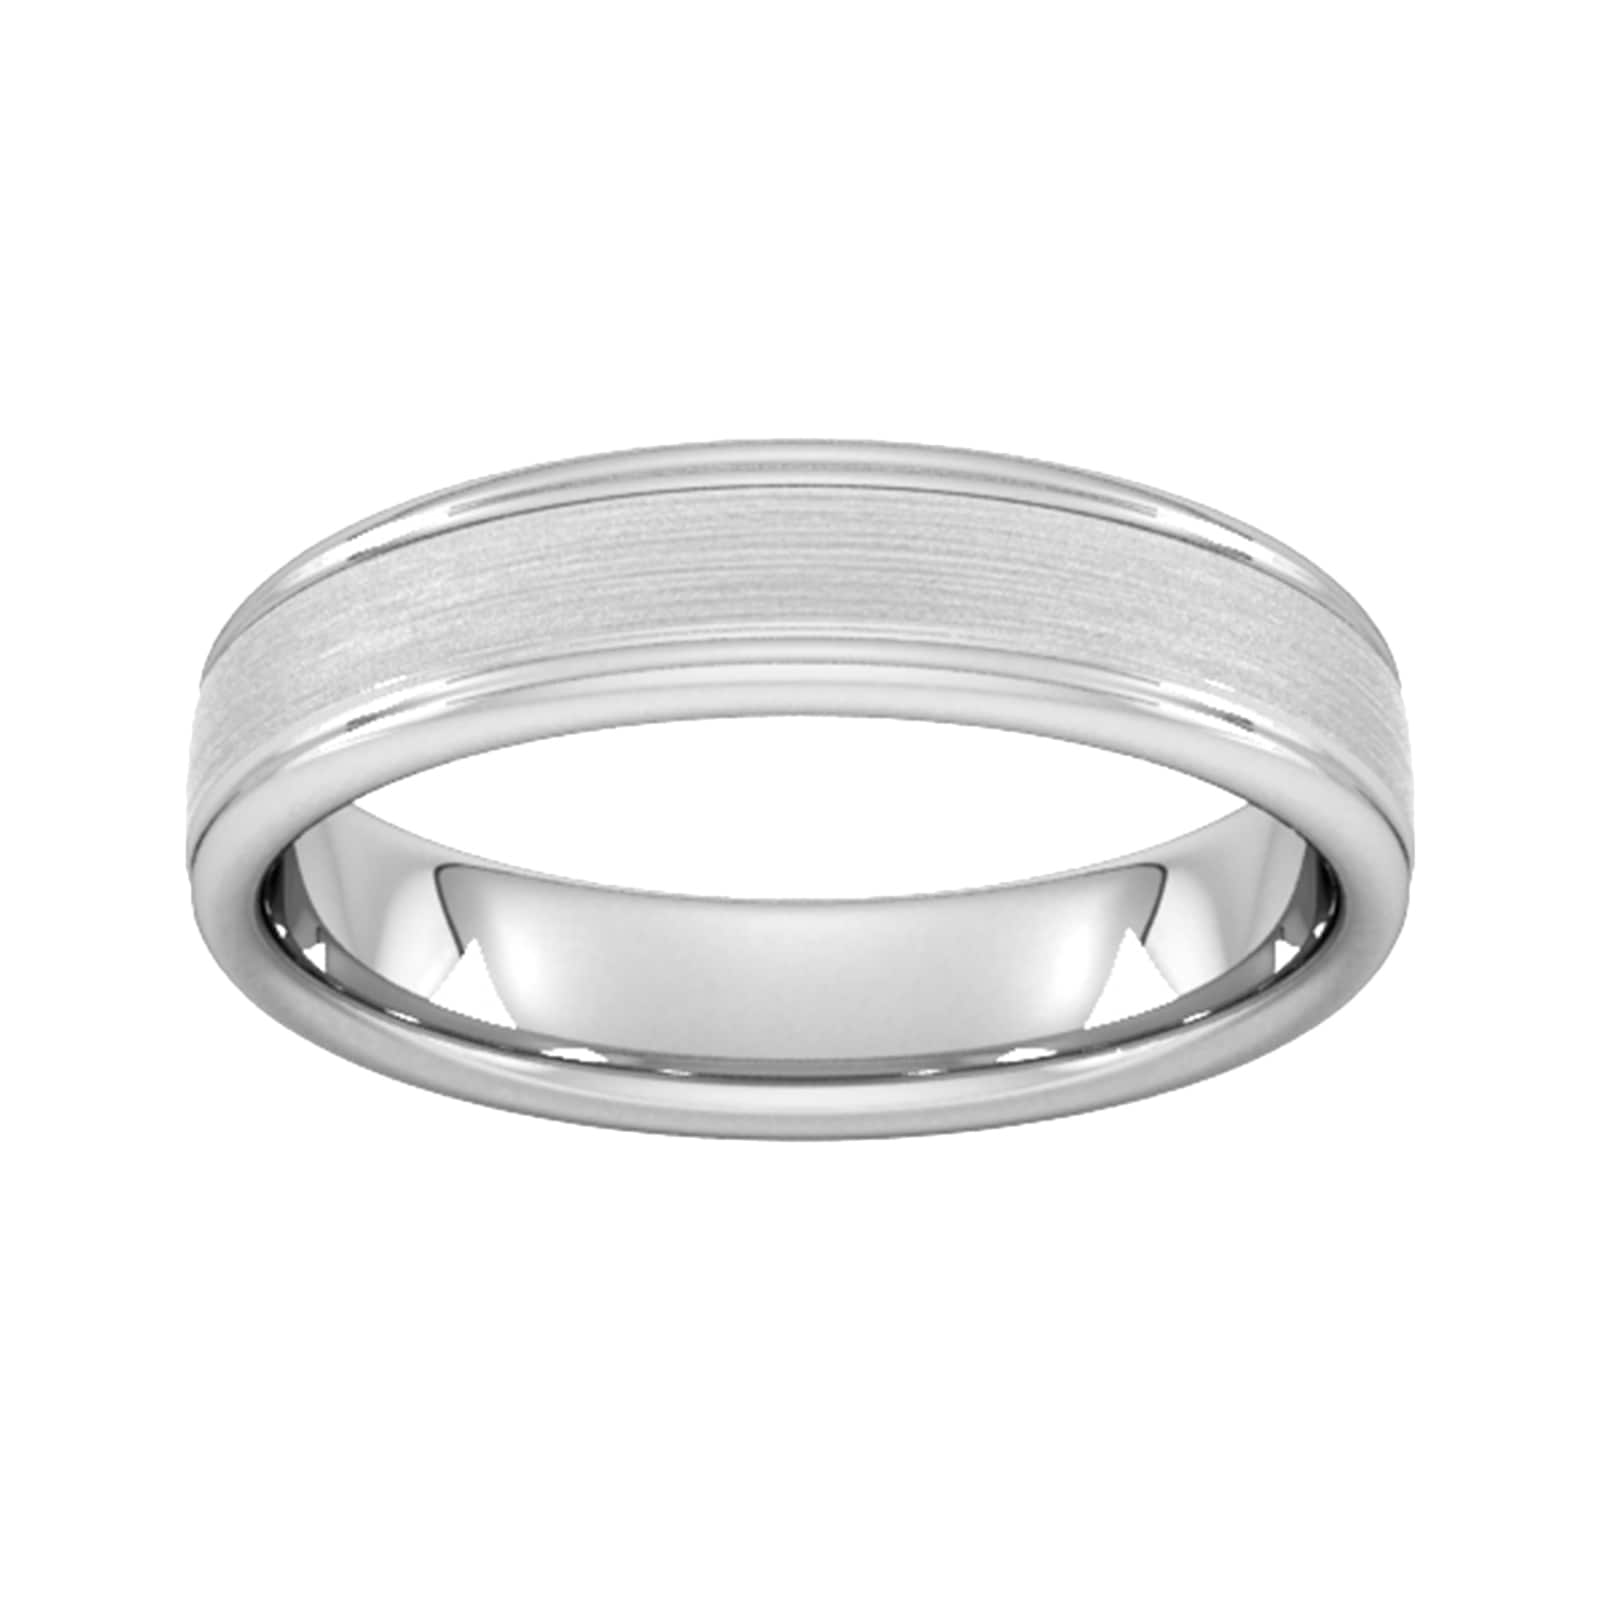 5mm Flat Court Heavy Matt Centre With Grooves Wedding Ring In 950 Palladium - Ring Size S